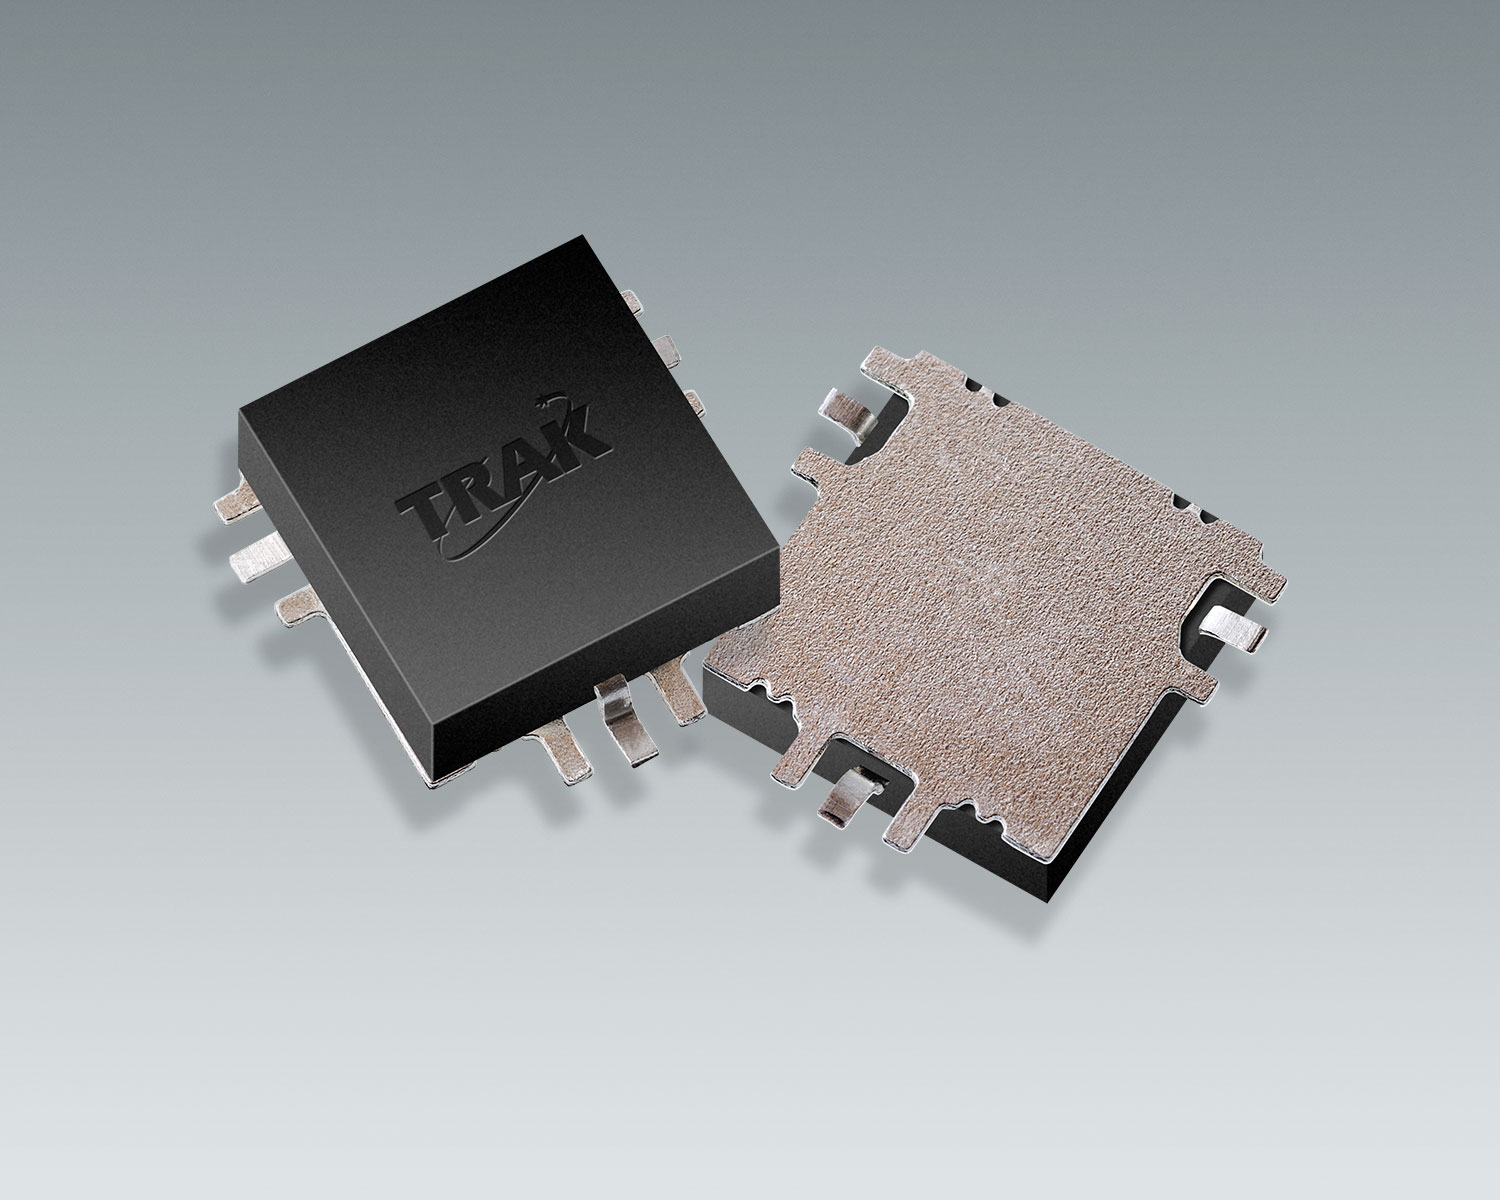 X-Band Surface Mount Circulator Offers Ultra-low Insertion Loss